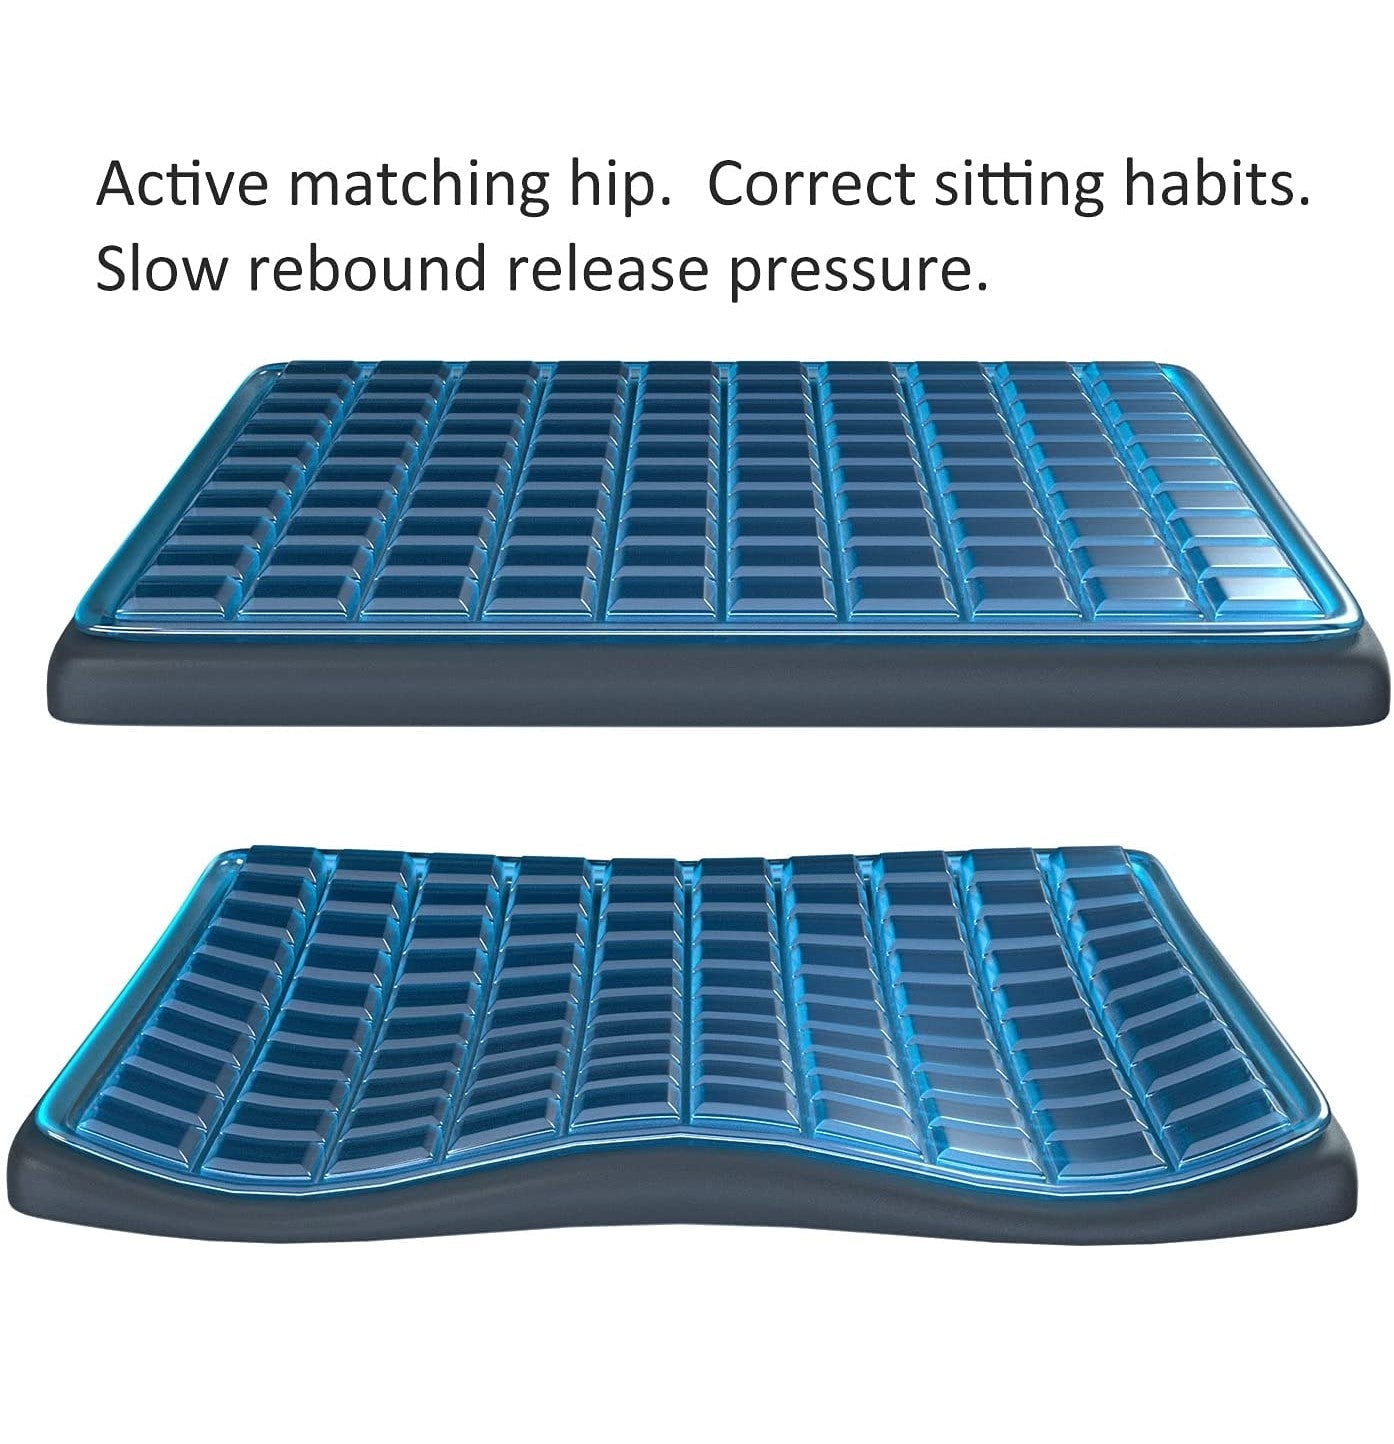 Gel Seat Cushion for Hip Pain, Long Sitting. Great for Pressure